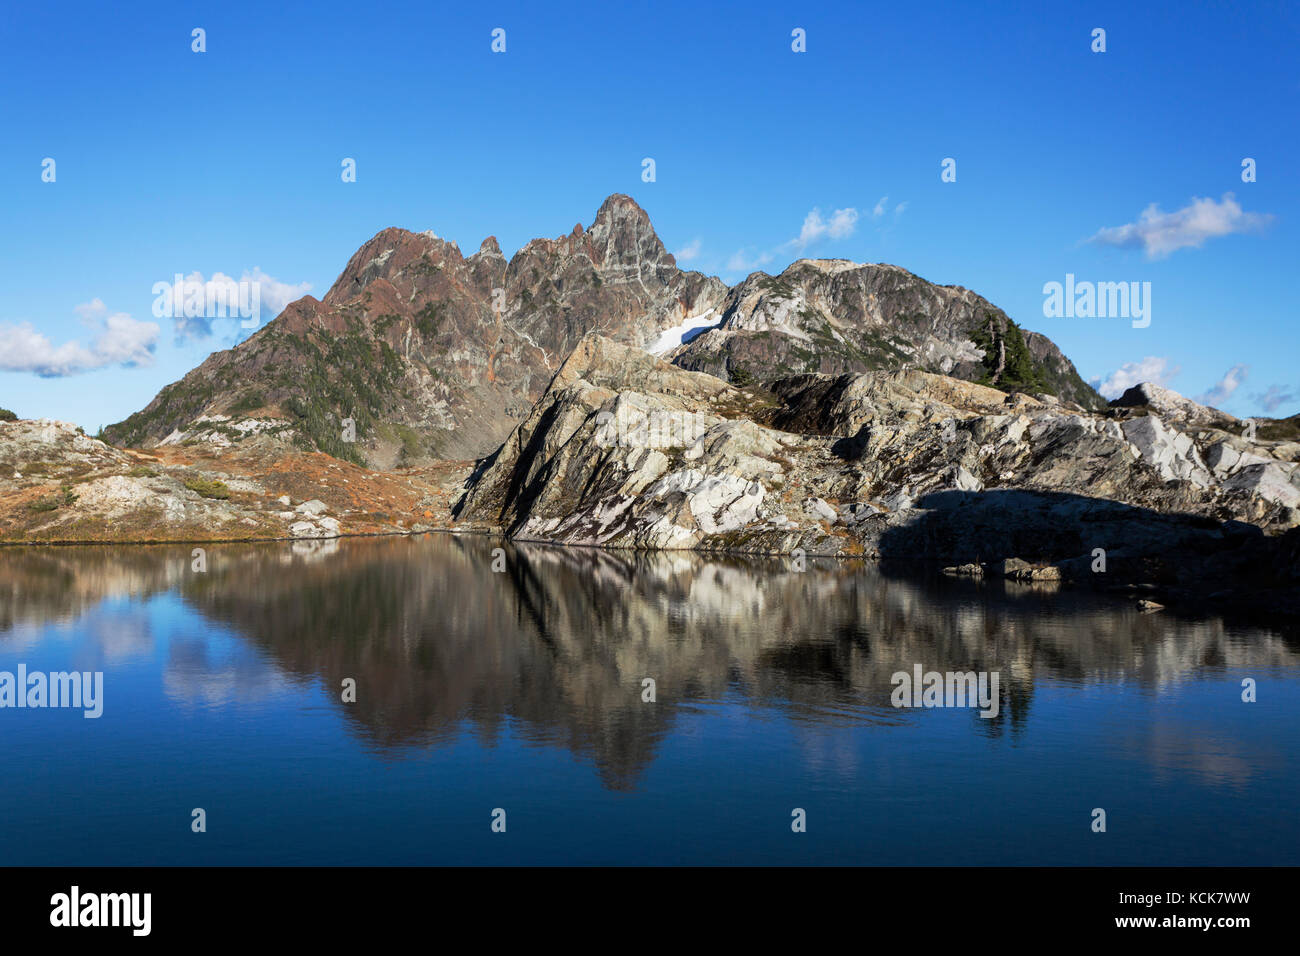 The Mt. Septimus massif is refected in a large tarn, near Cream Lake in Strathcona Park, Strathcona Park, Central Vancouver Island, British Columbia, Canada Stock Photo